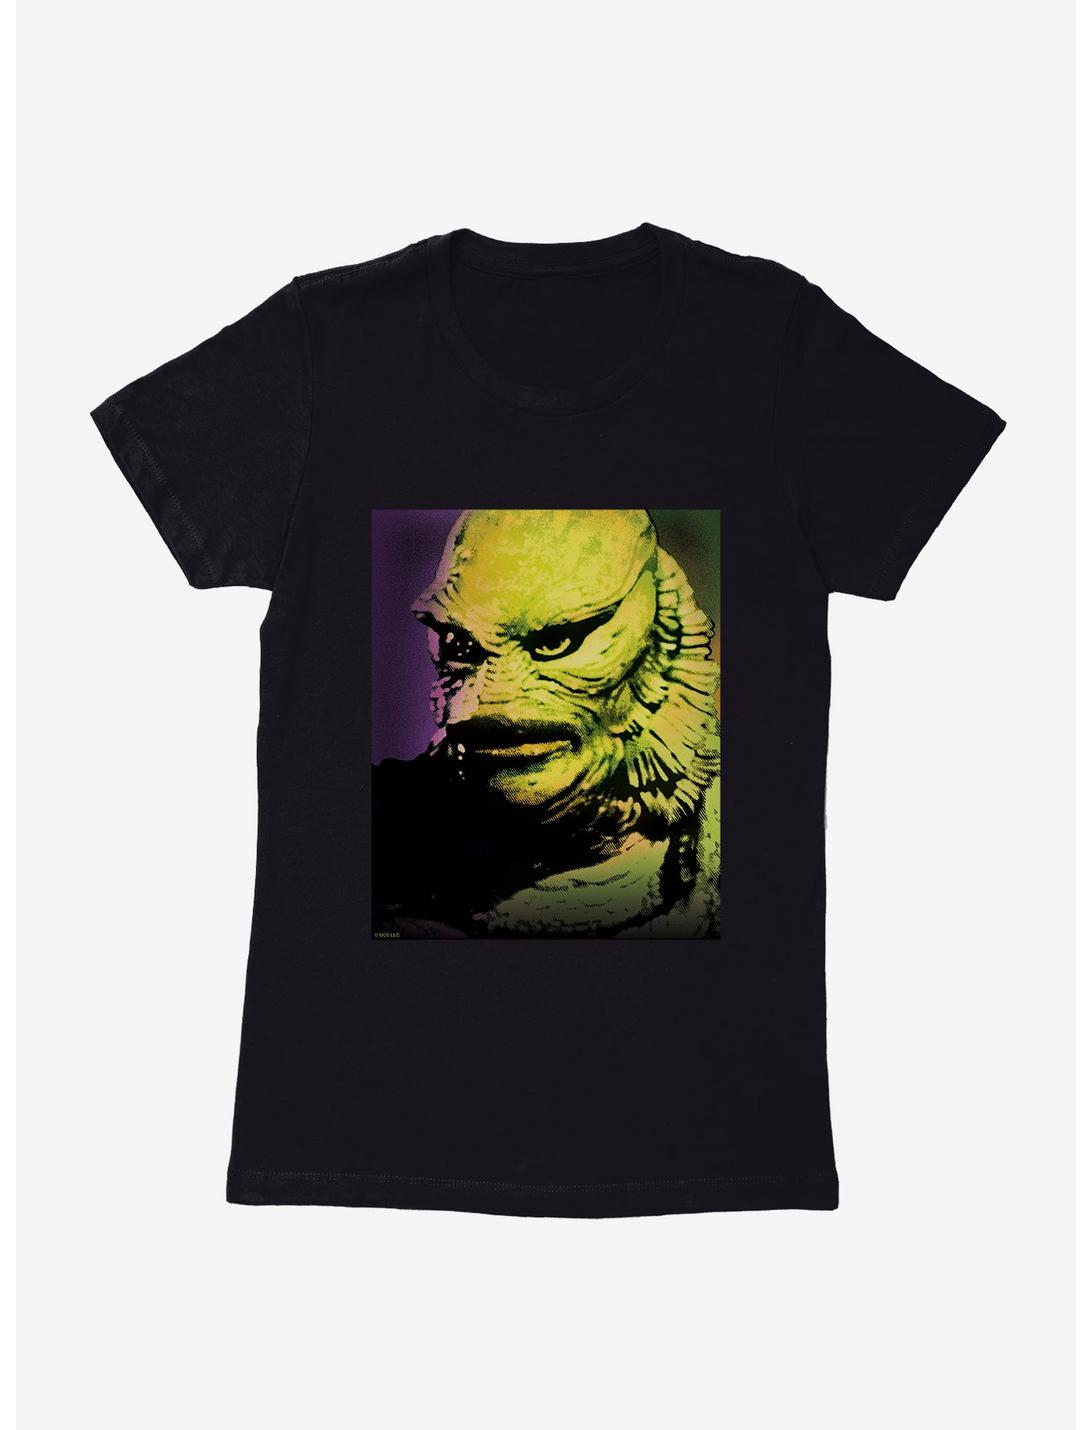 Creature From The Black Lagoon Live Action Glare Womens T-Shirt, BLACK, hi-res